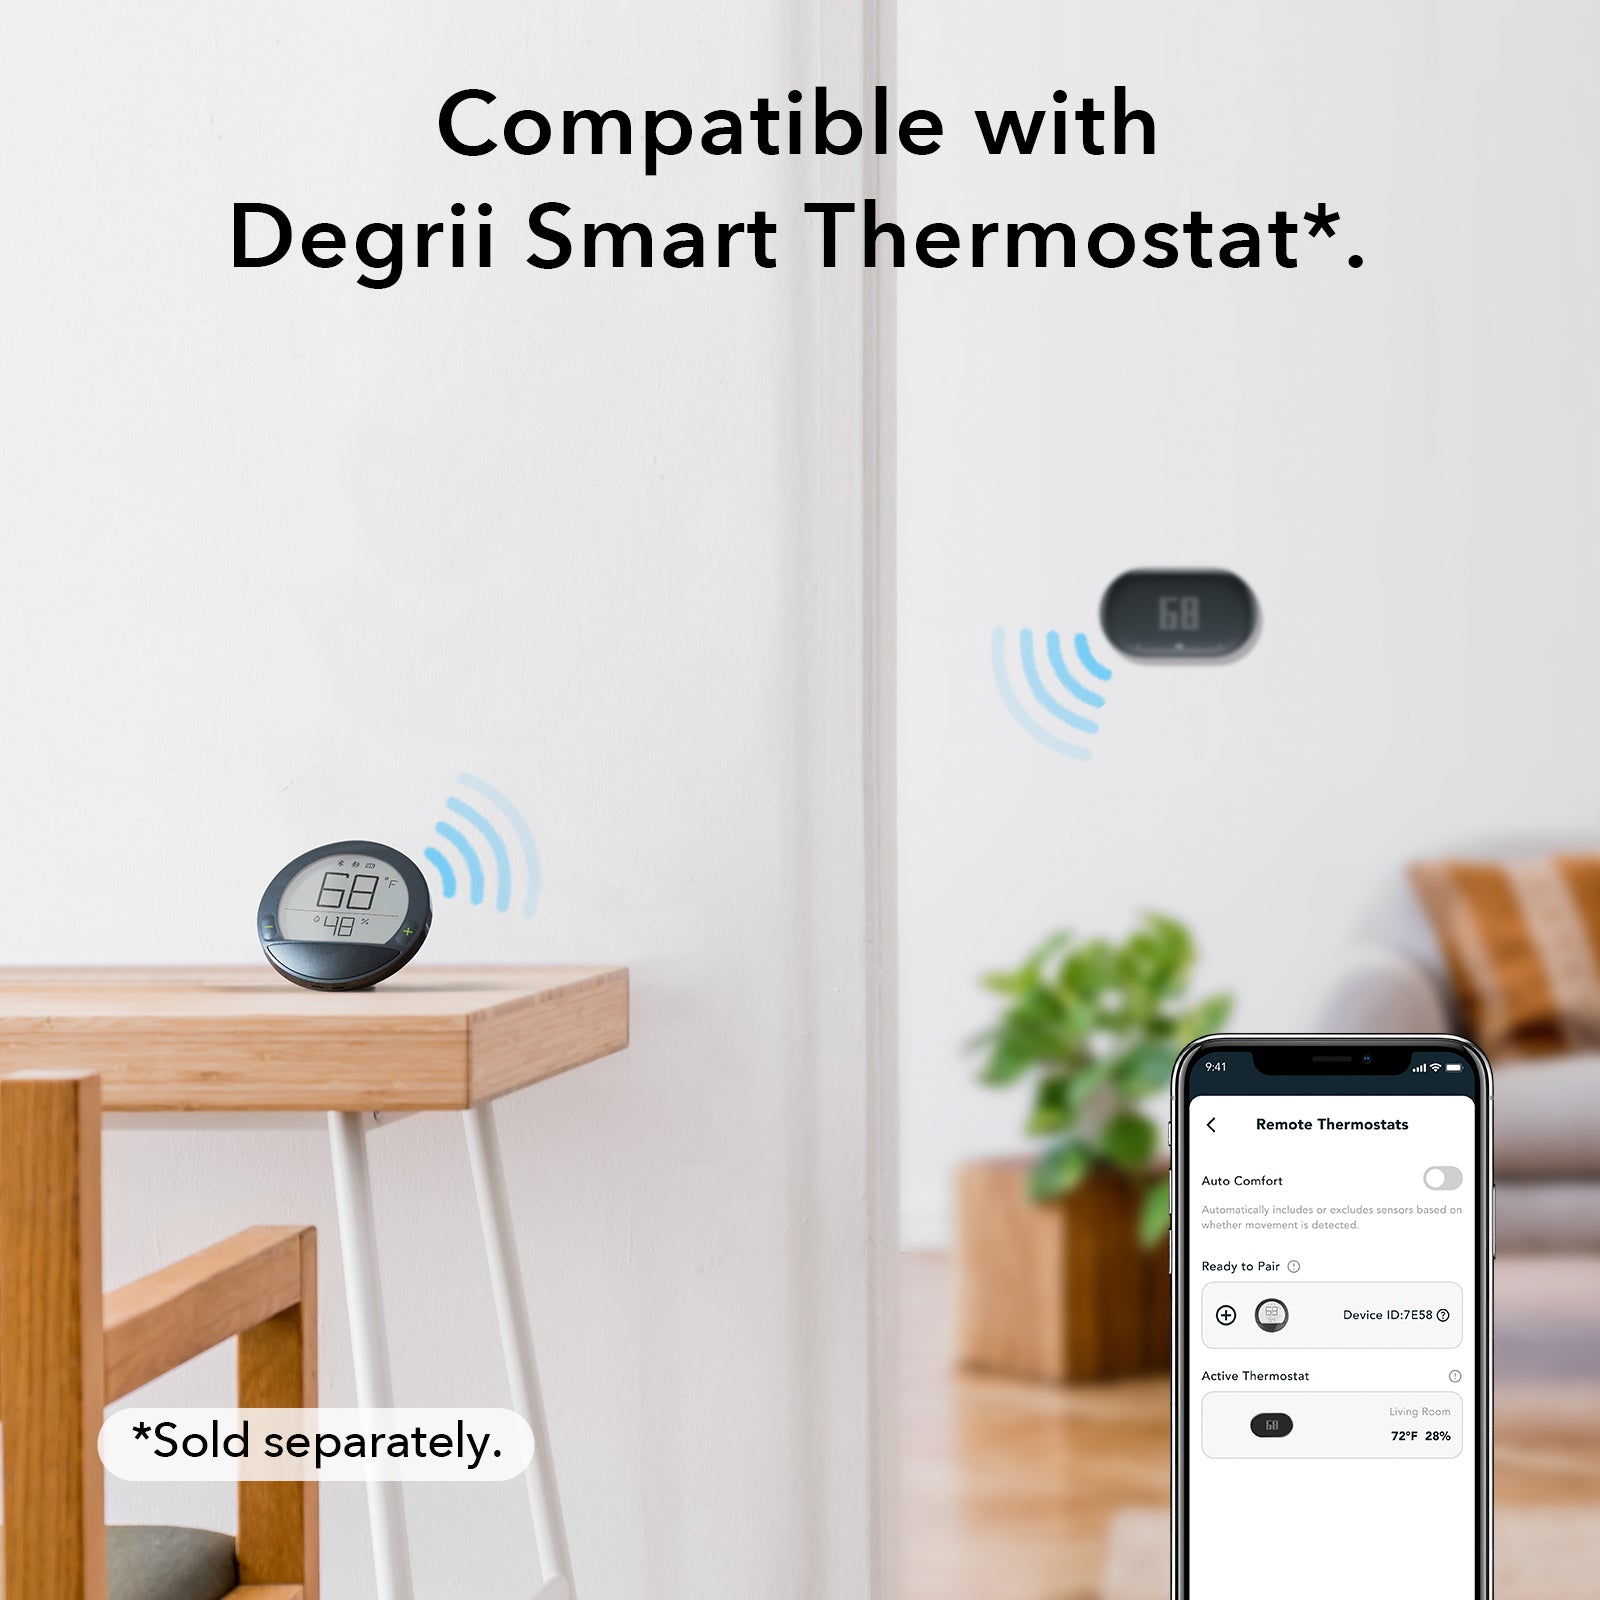 Remote Thermostat – Degrii